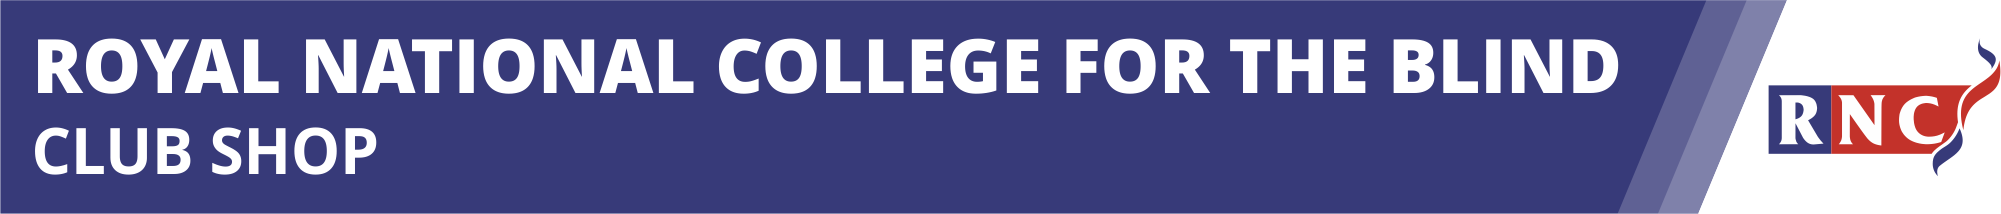 royal-national-college-for-the-blind-club-shop-banner.png